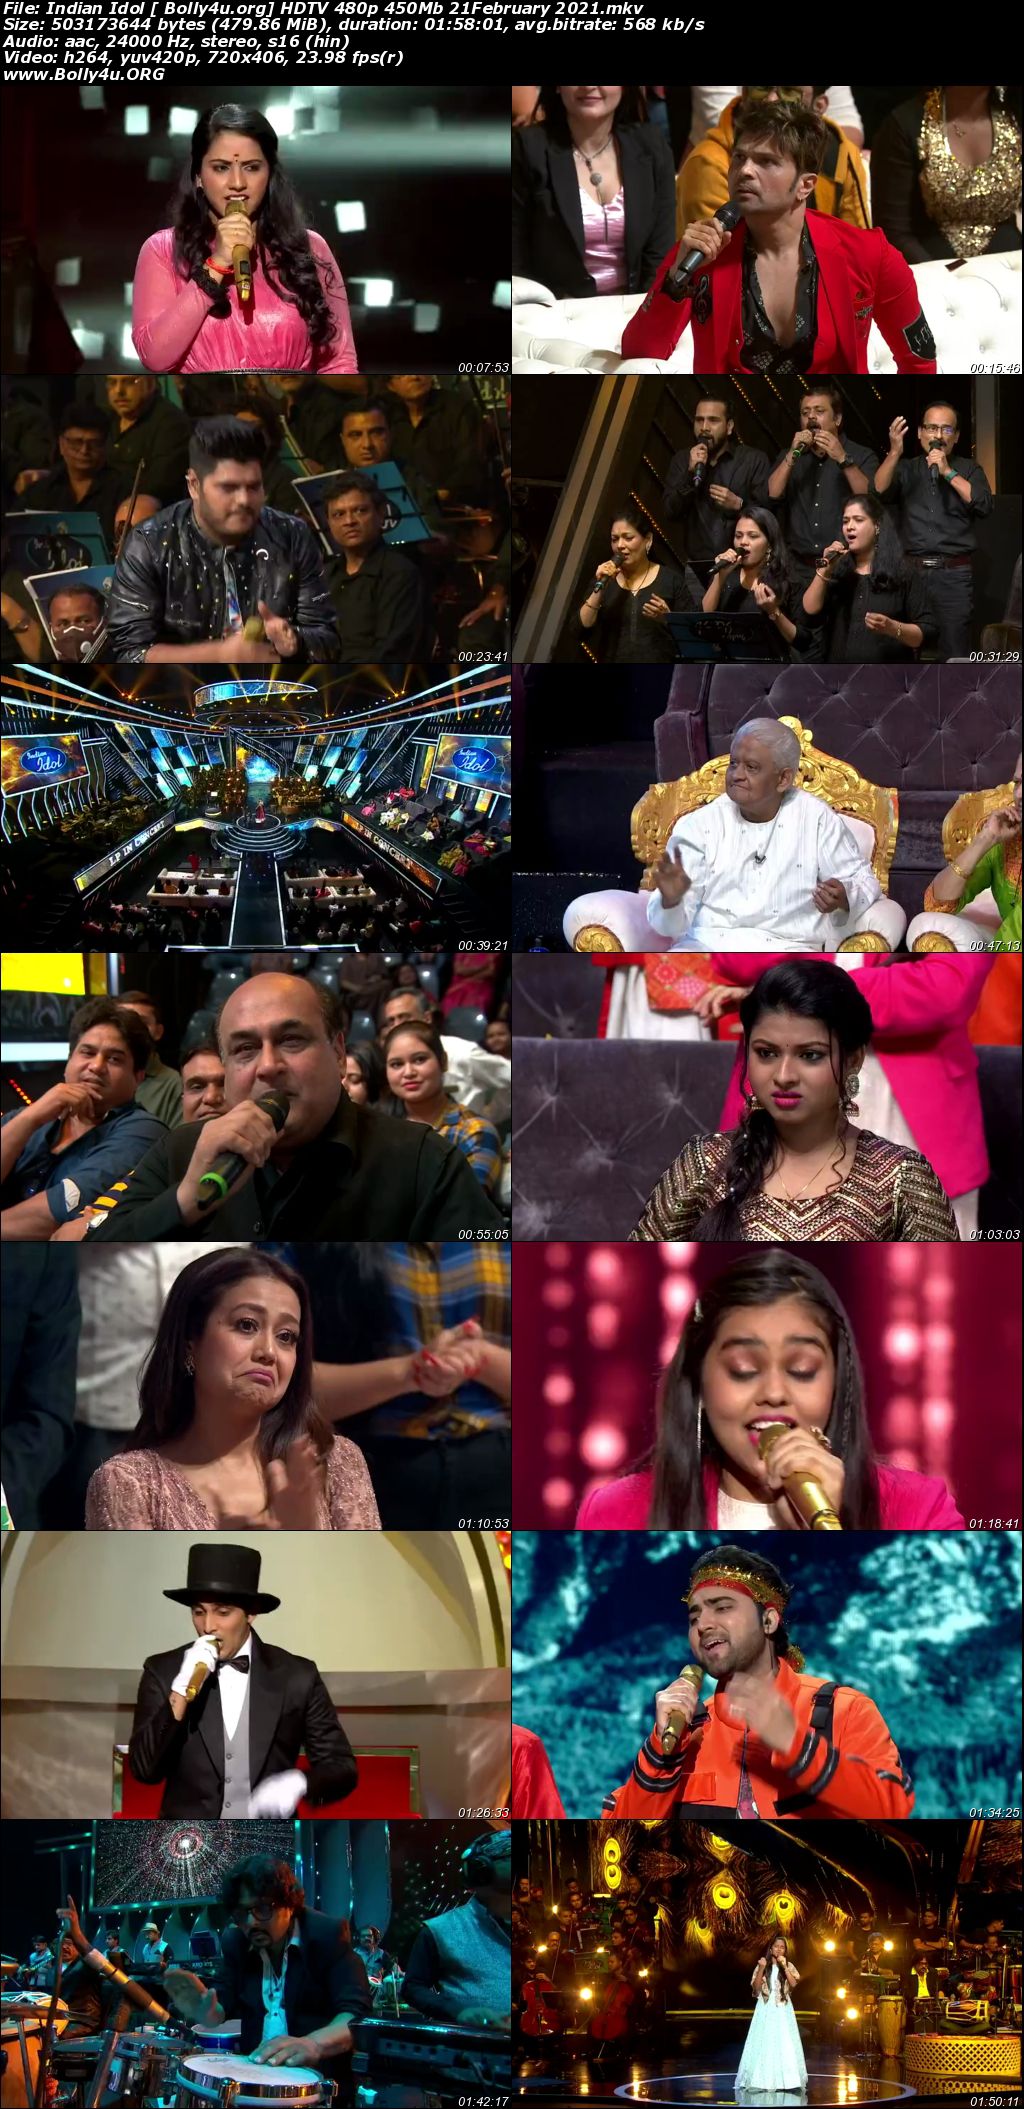 Indian Idol 2021 HDTV 480p 450Mb 21 February 2021 Download